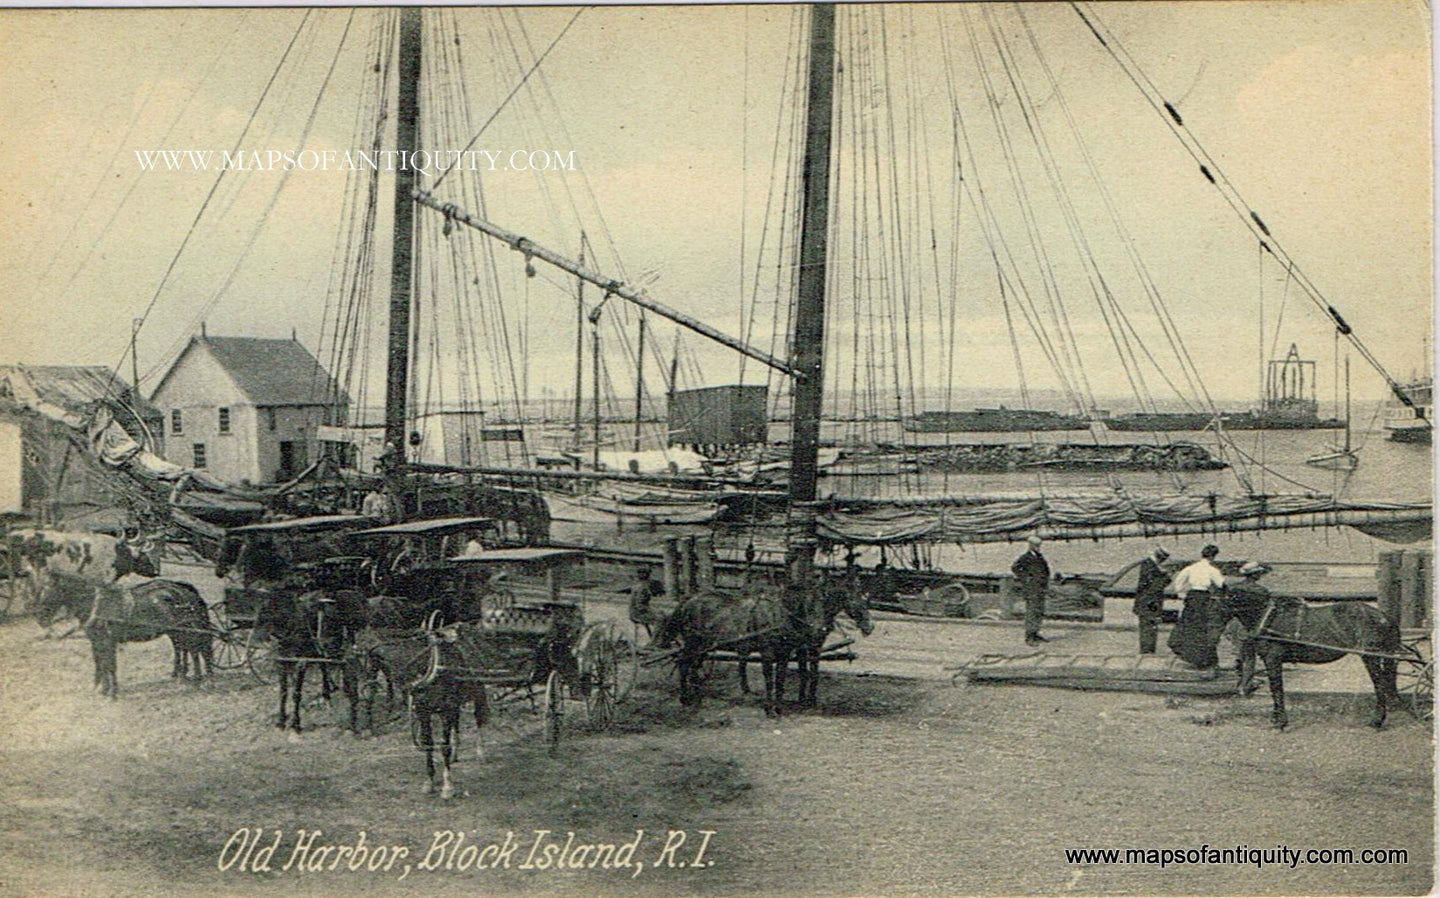 Antique-Black-and-White-Post-Card-Old-Harbor-Block-Island-Rhode-Island-Postcard---Postcard-**********-Postcard-Rhode-Island-1898-1901-The-Rotograph-Co-NY-Maps-Of-Antiquity